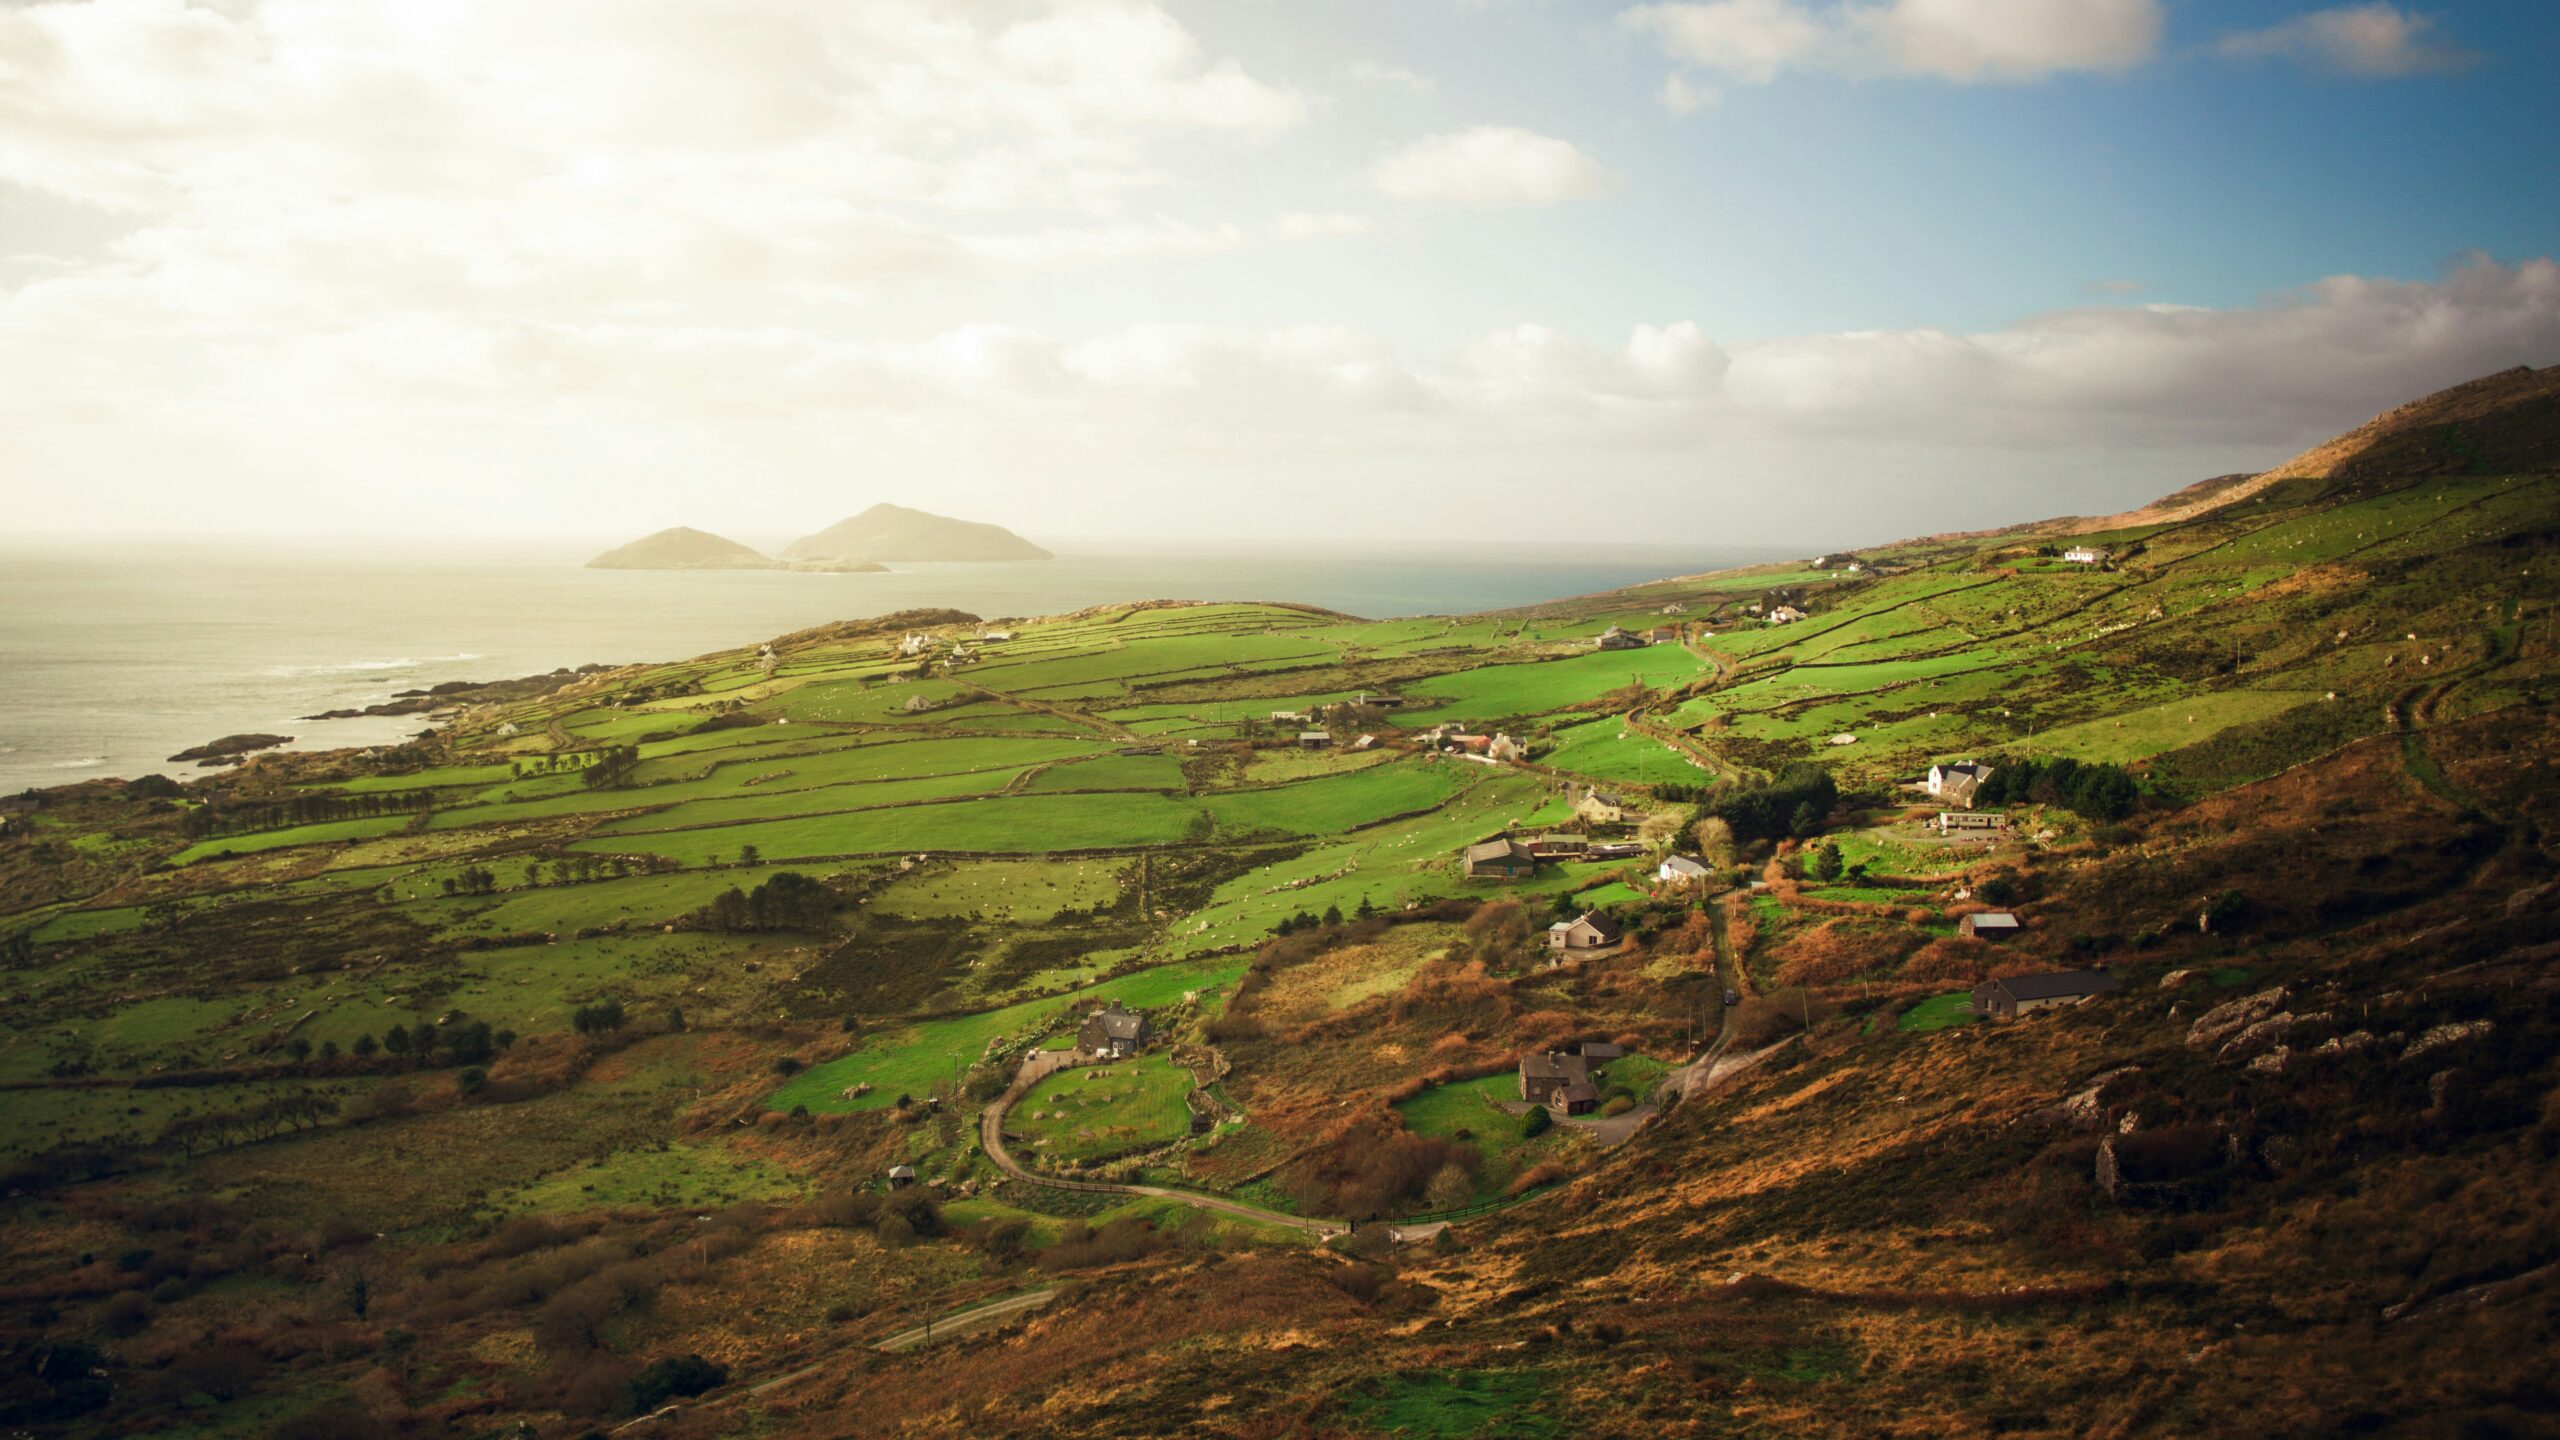 The weather of May makes for an ideal time to visit Ireland.
pictured: the lush green hills of Ireland 